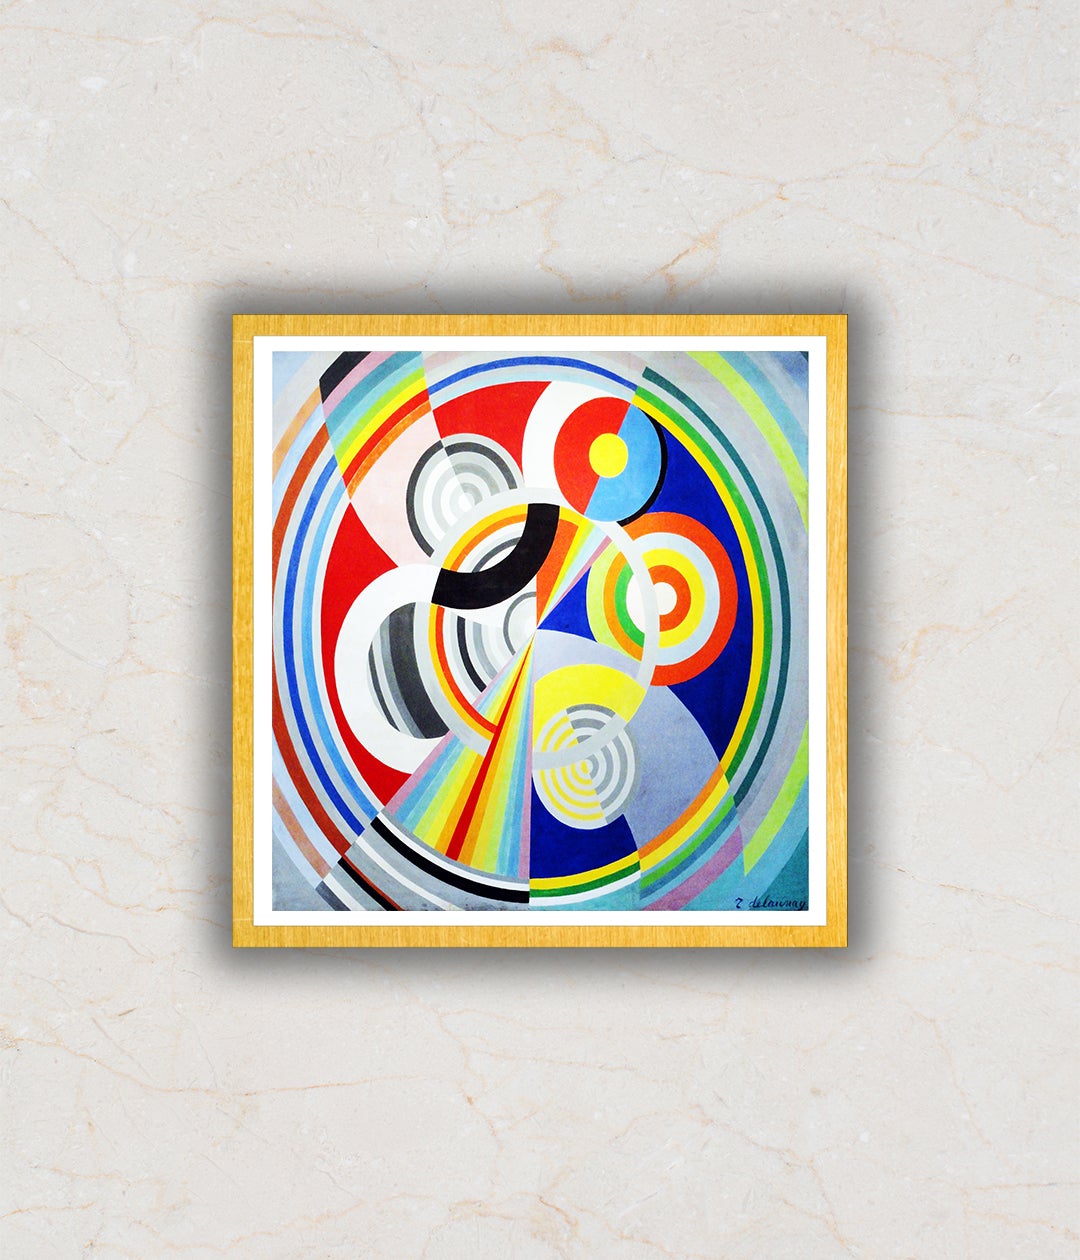 Rhythm Modern Abstract Painting Artwork For Home Wall DŽcor by Robert Delaunay 2